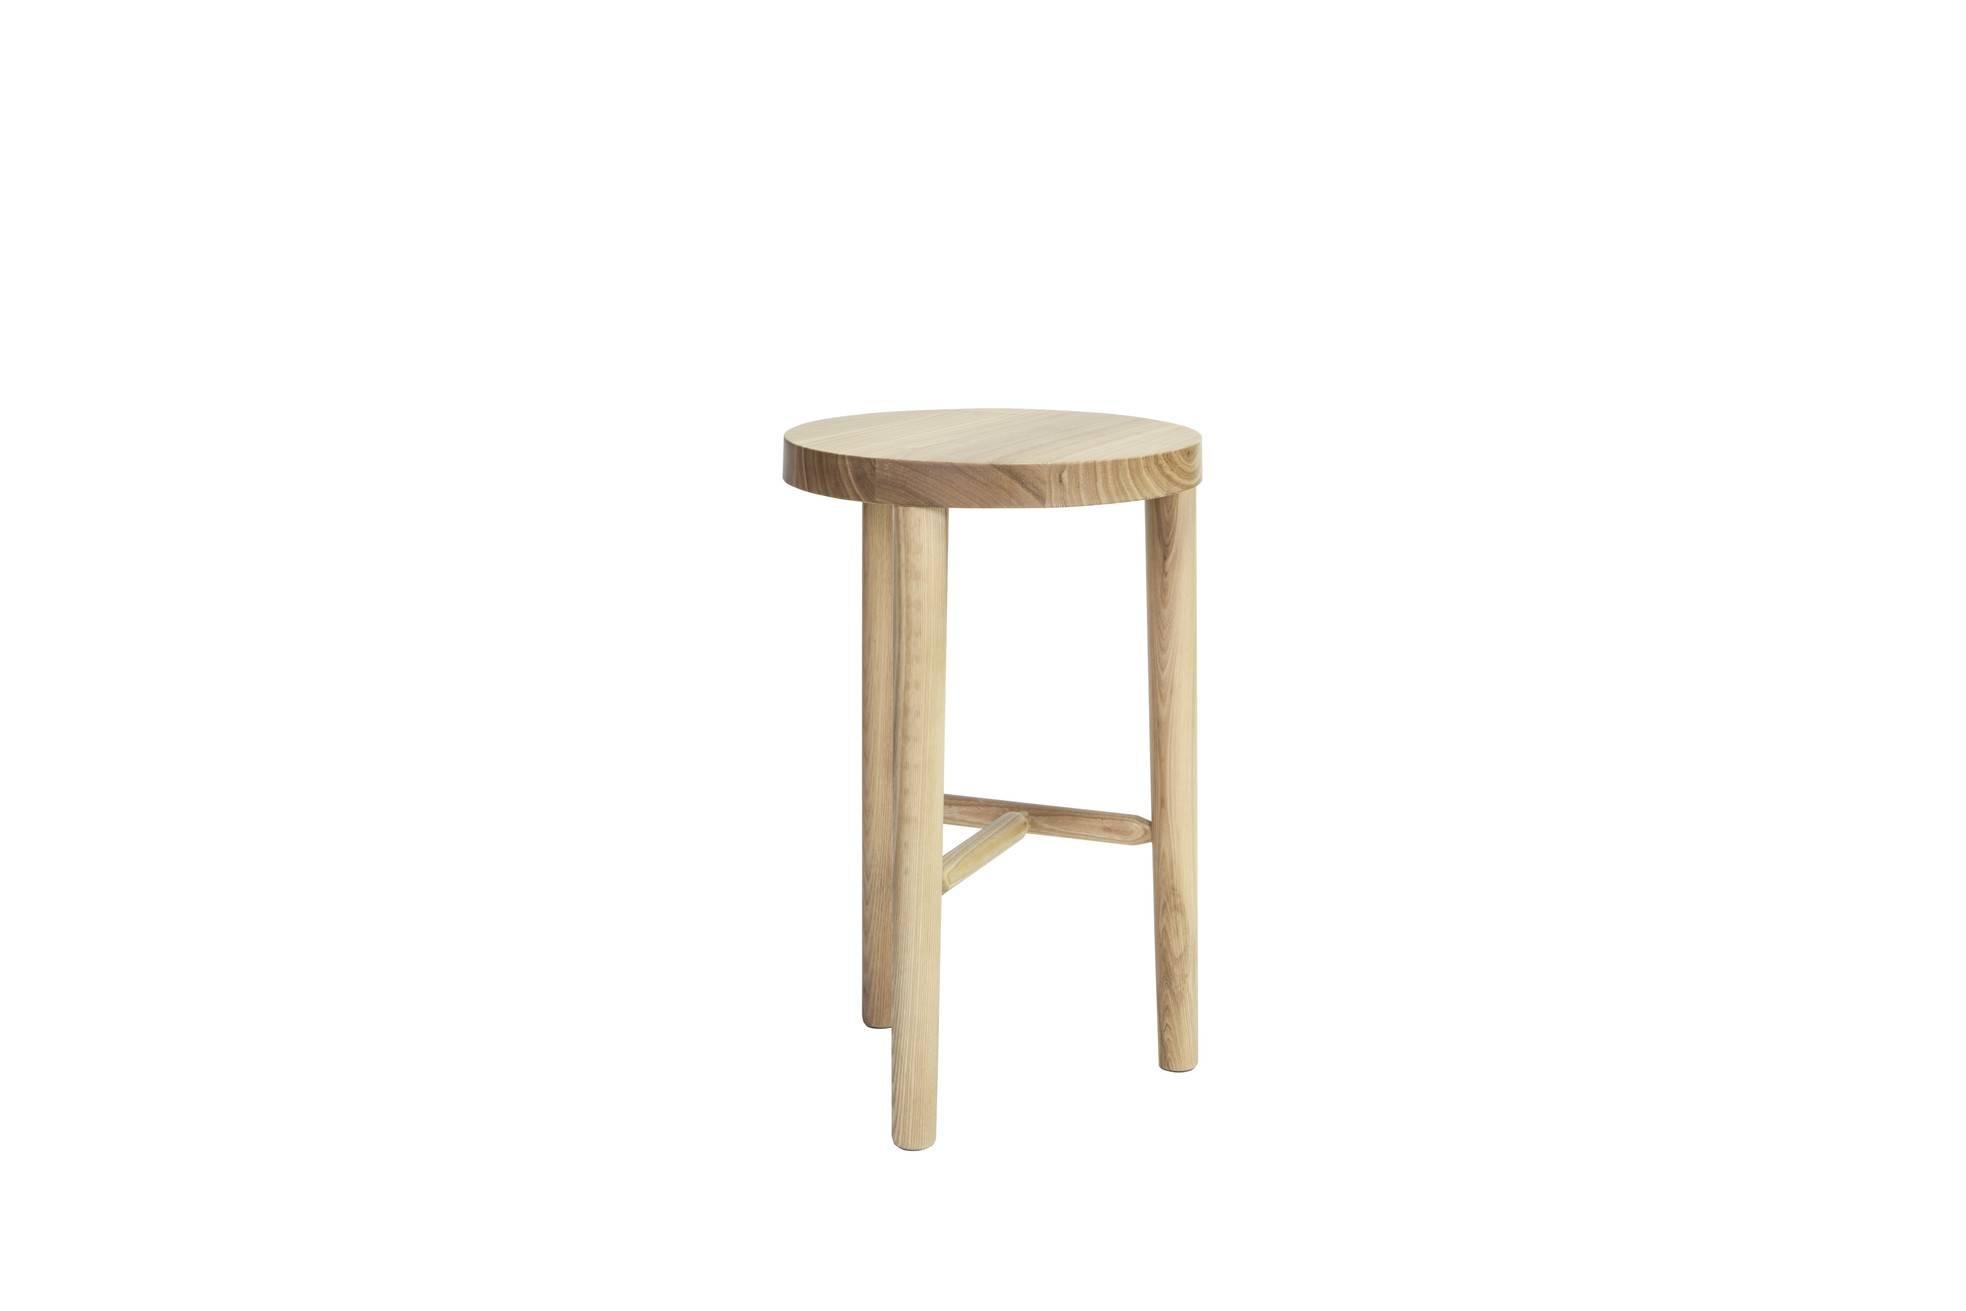 A milking bar stool made of solid white ash and matte clear polyurethane.